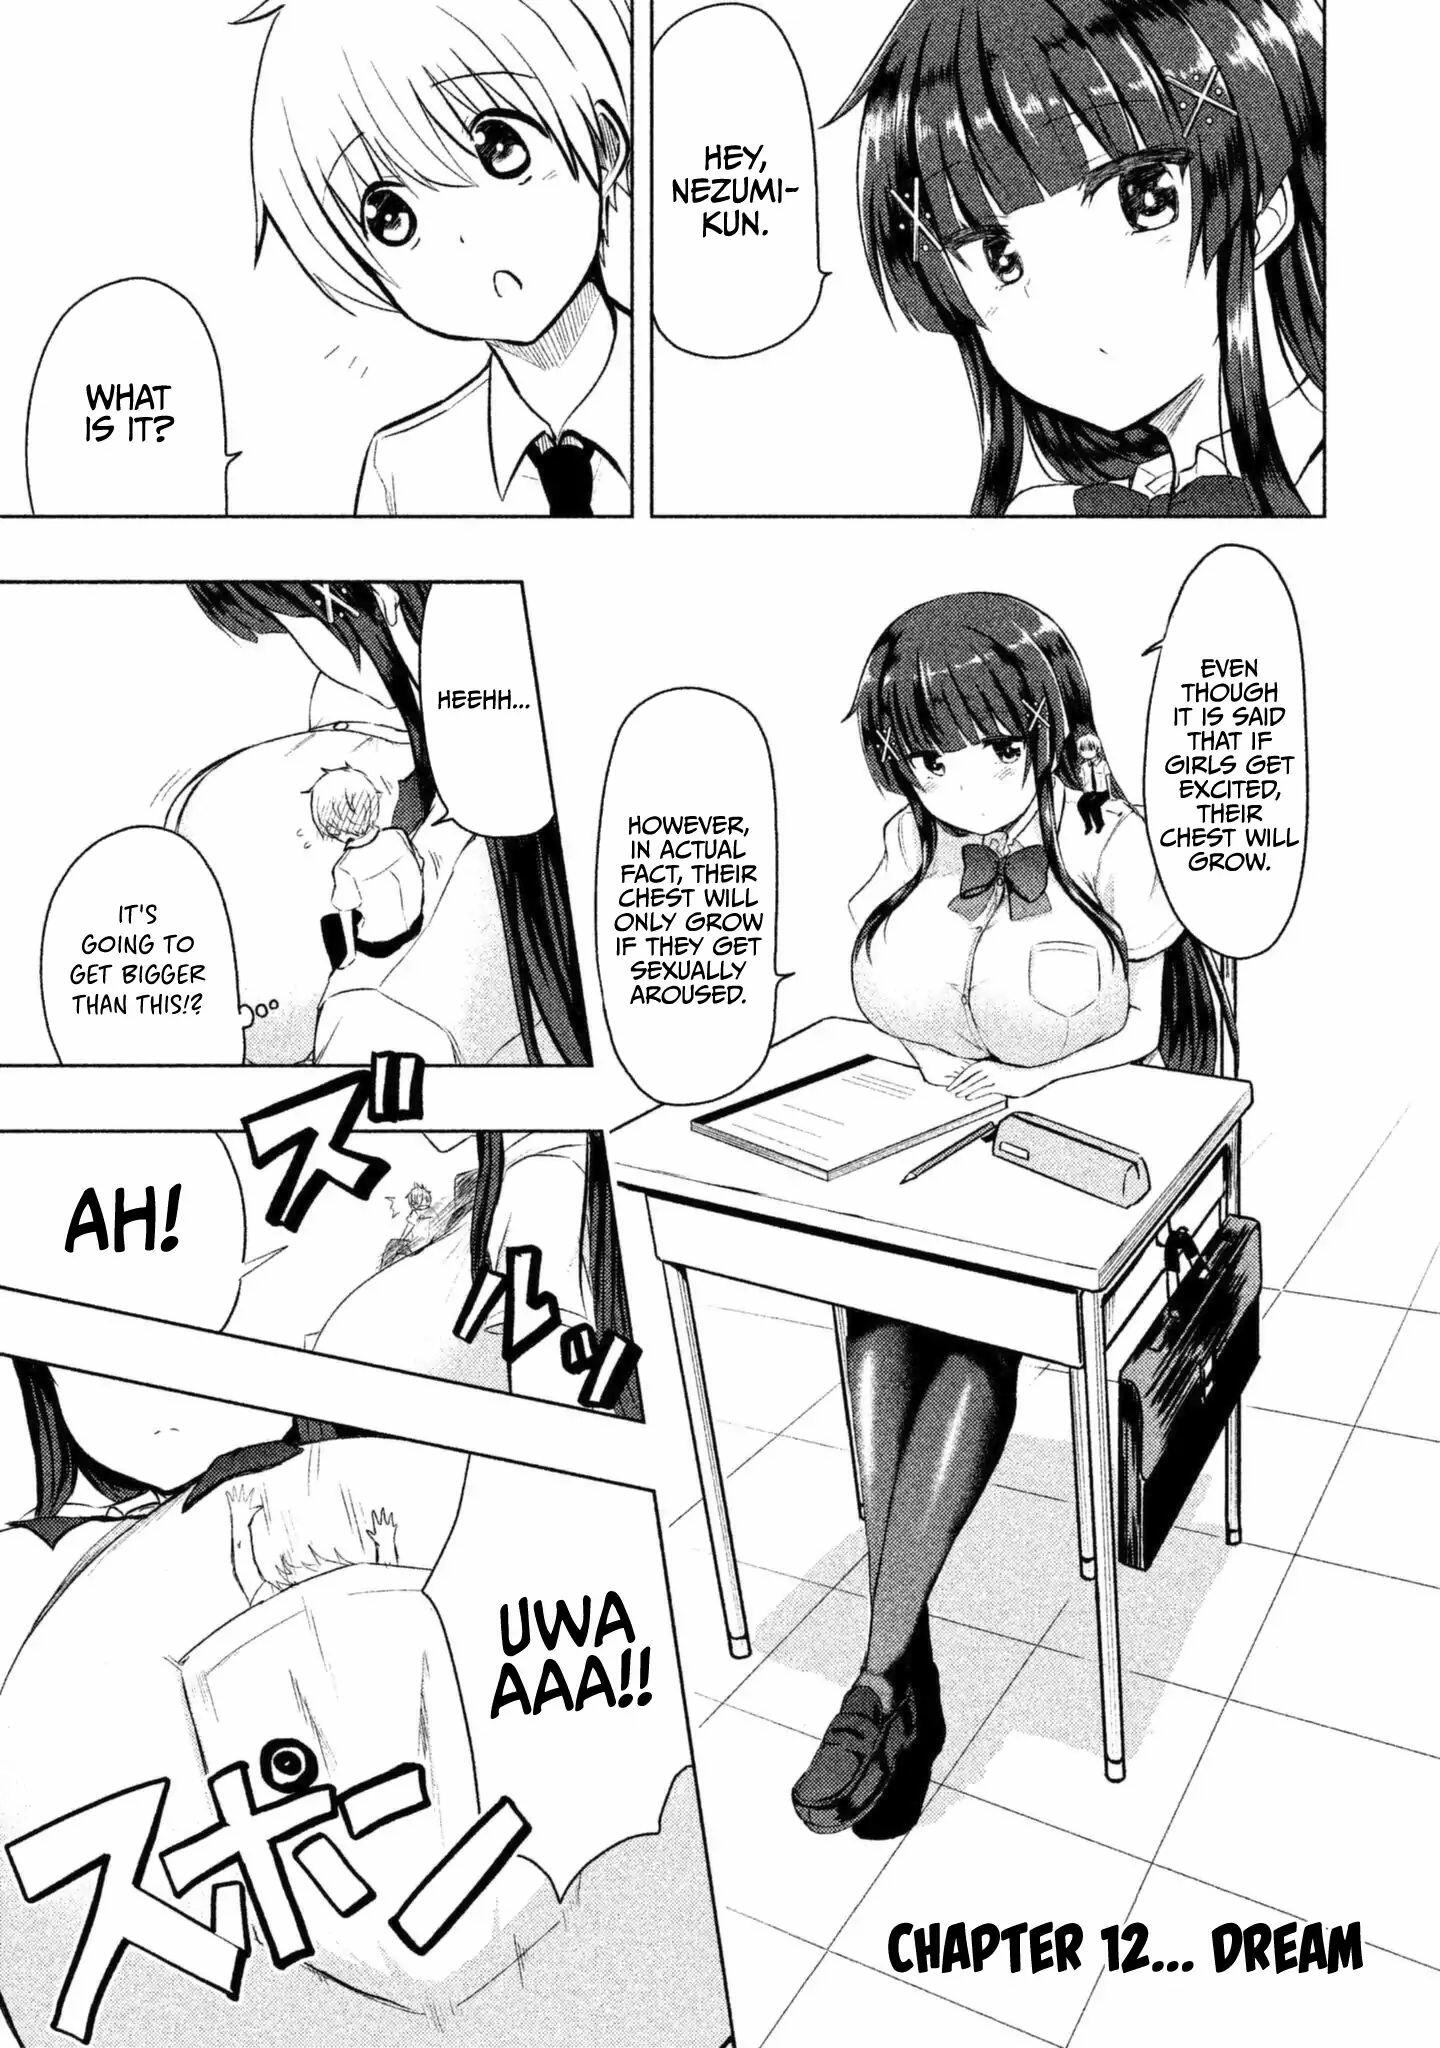 A Girl Who Is Very Well-Informed About Weird Knowledge, Takayukashiki Souko-San Vol.1 Chapter 12: Dream page 2 - Mangakakalots.com